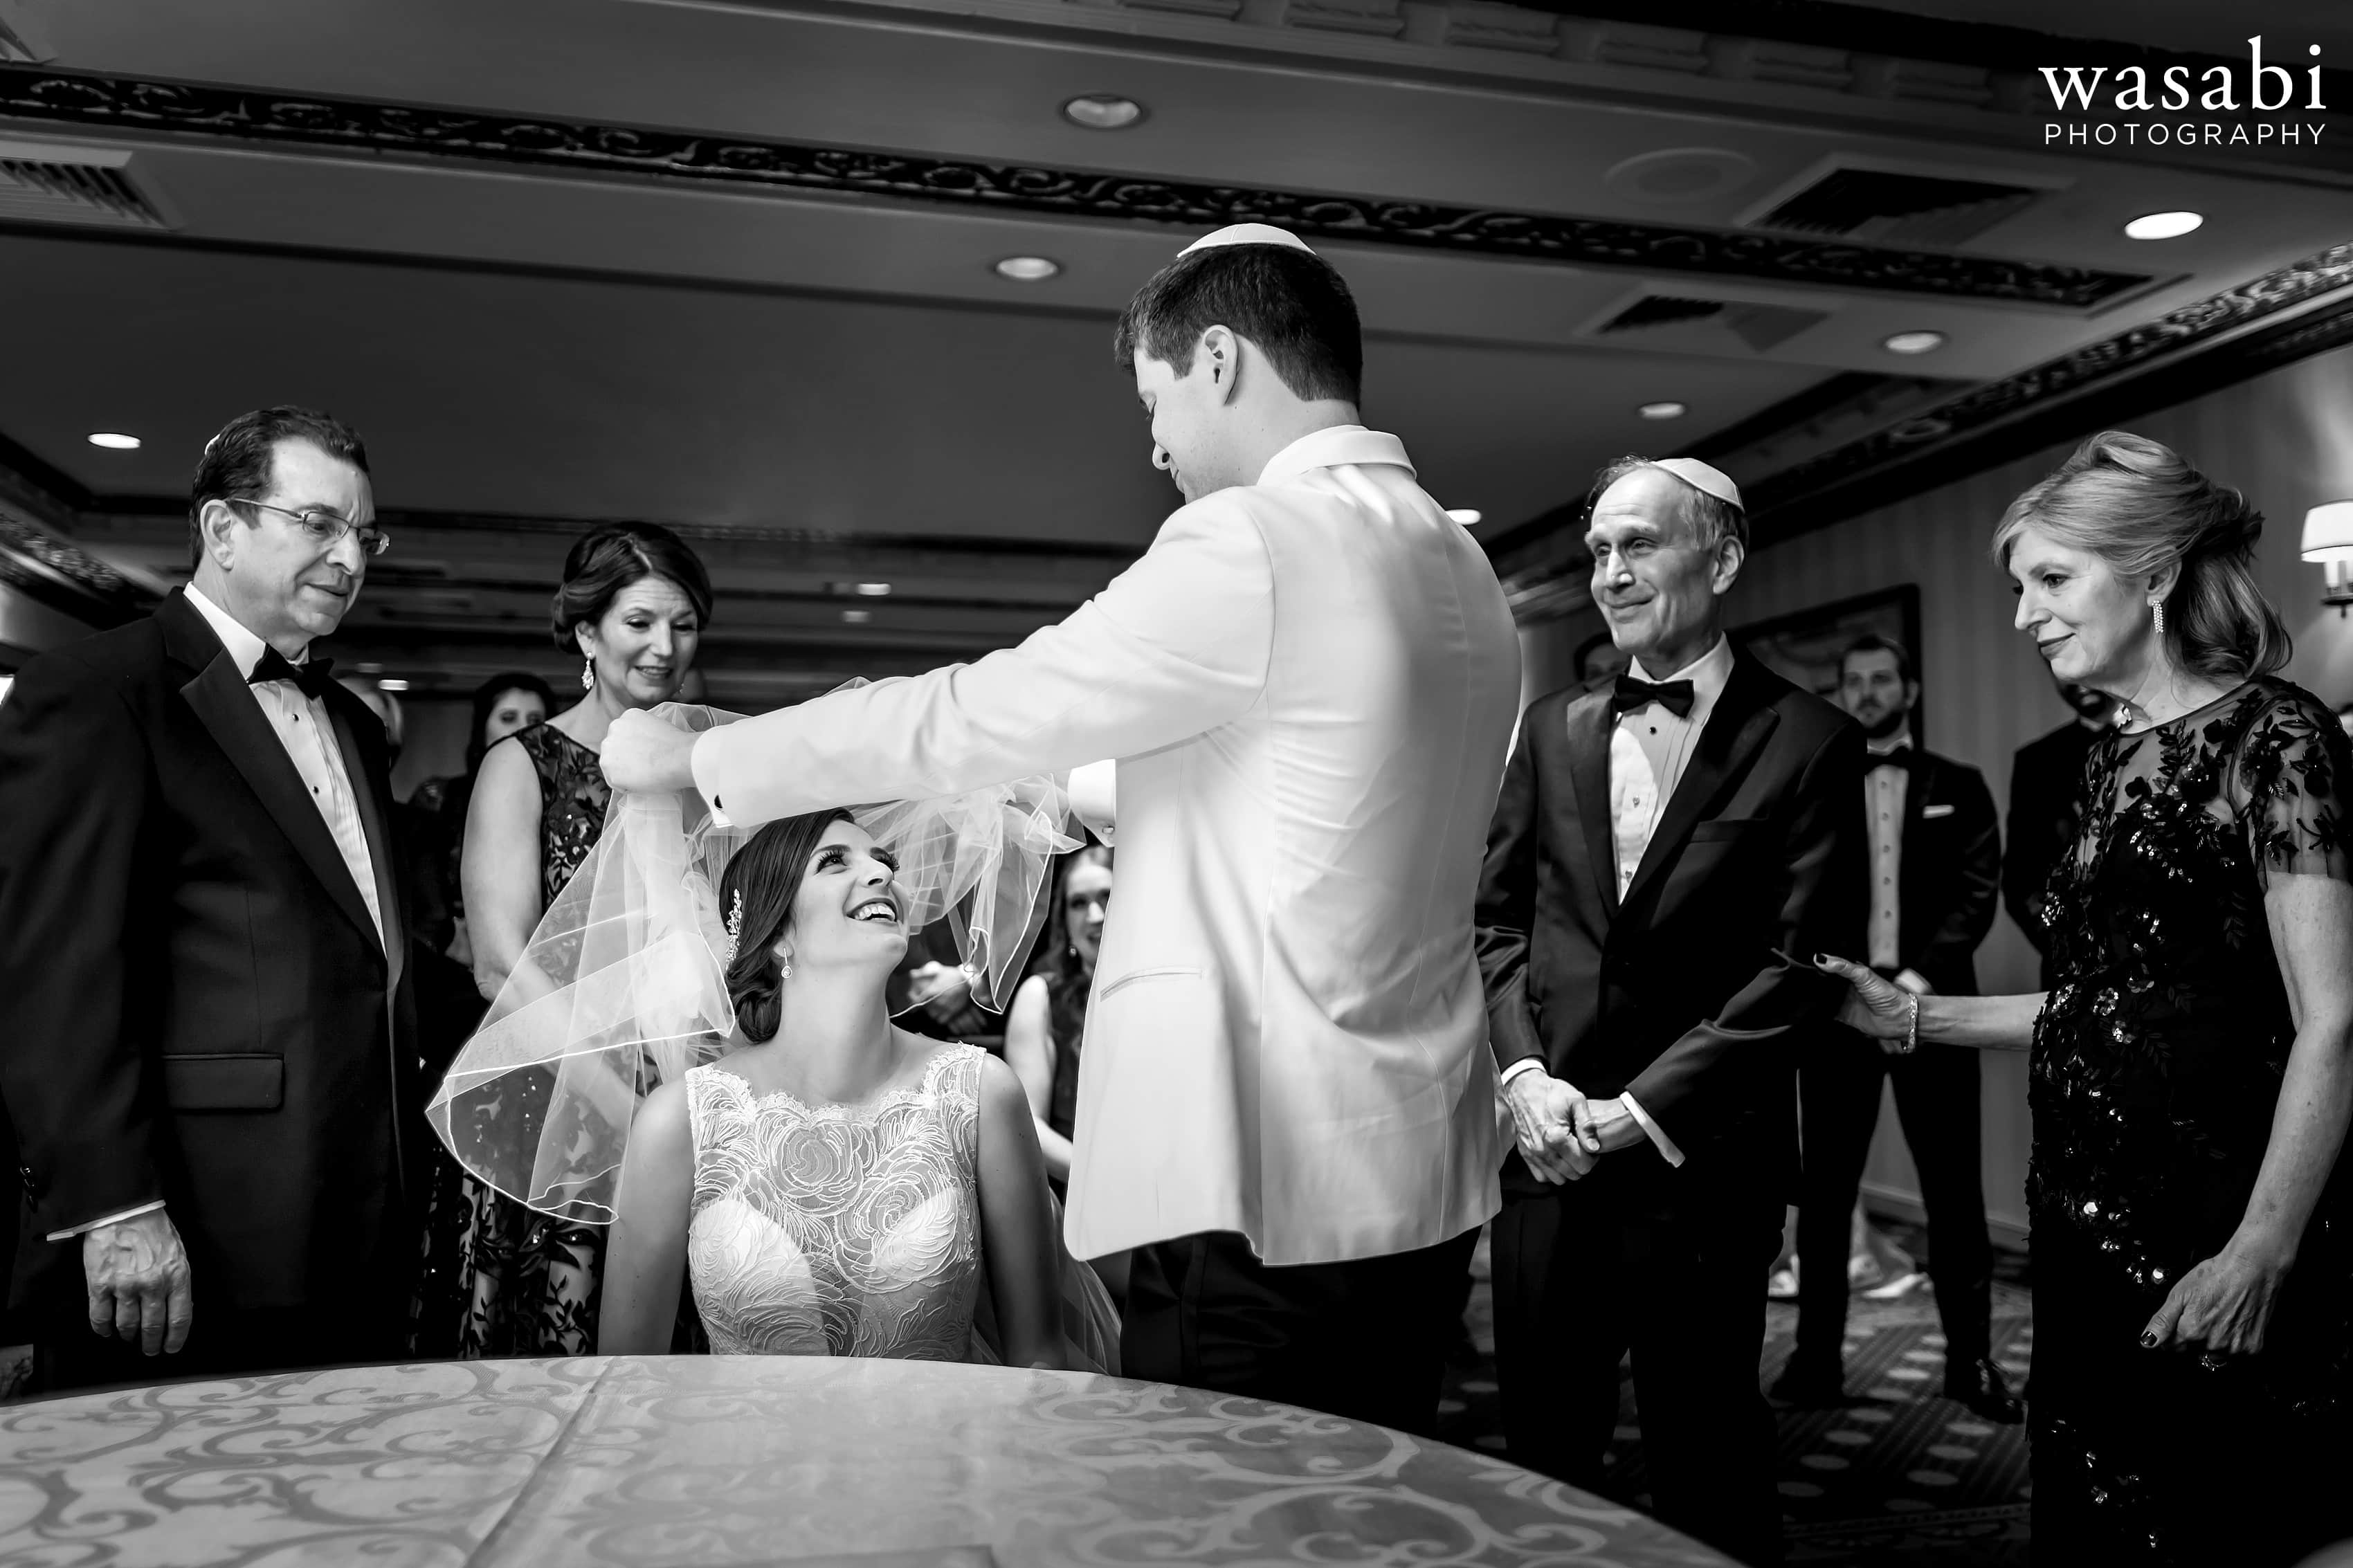 Bride and groom with parents during ketubah ceremony before Jewish wedding at InterContinental Chicago Magnificent Mile Hotel